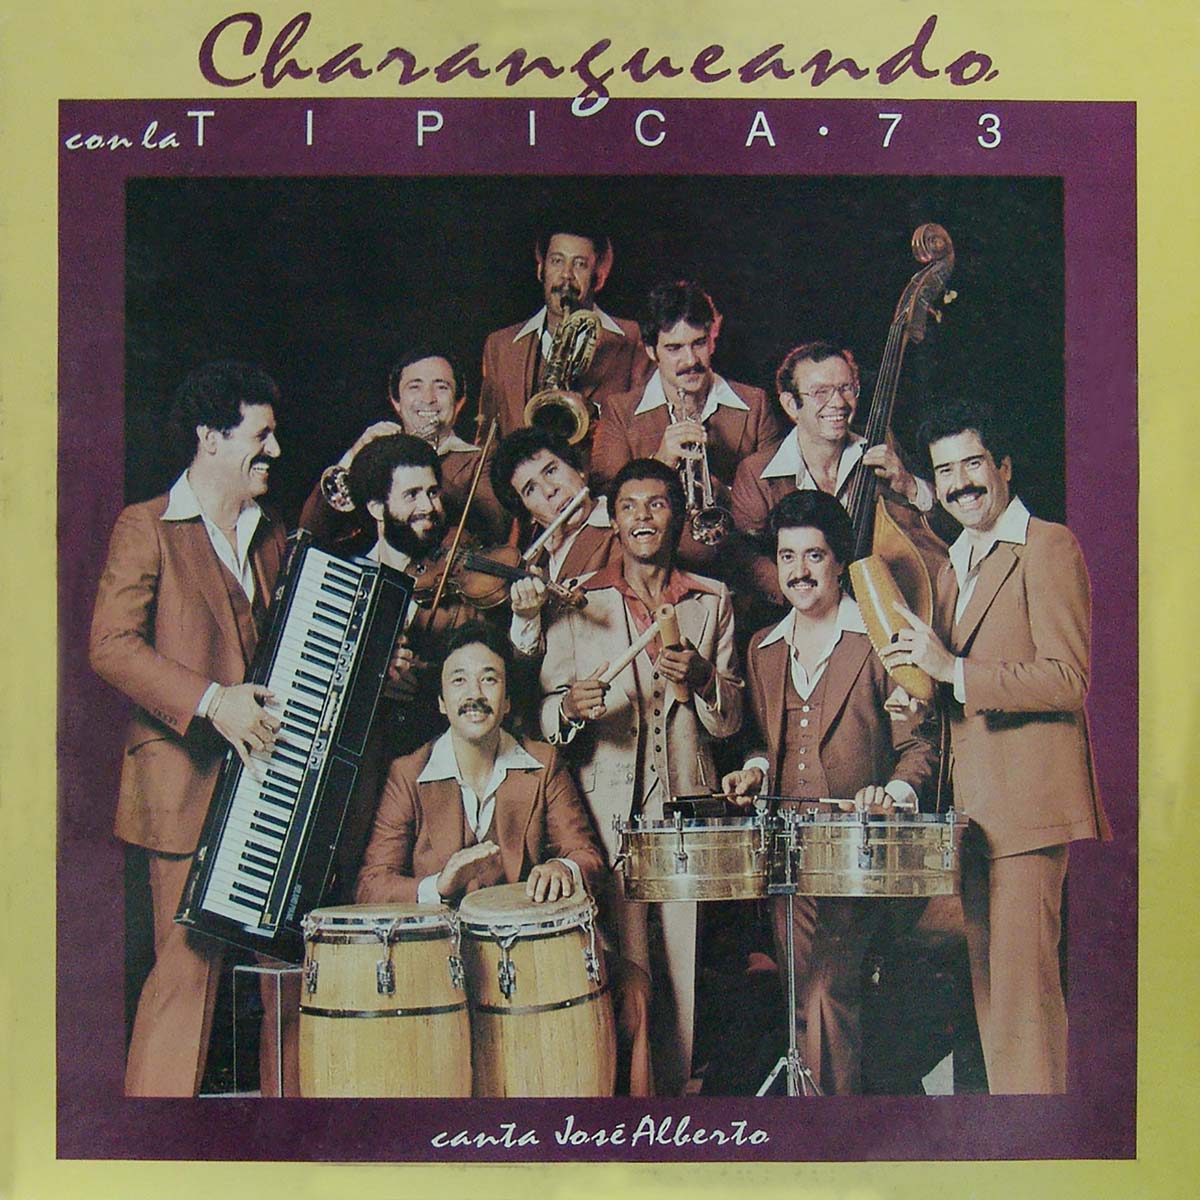 Featured Image for “Charangueando”